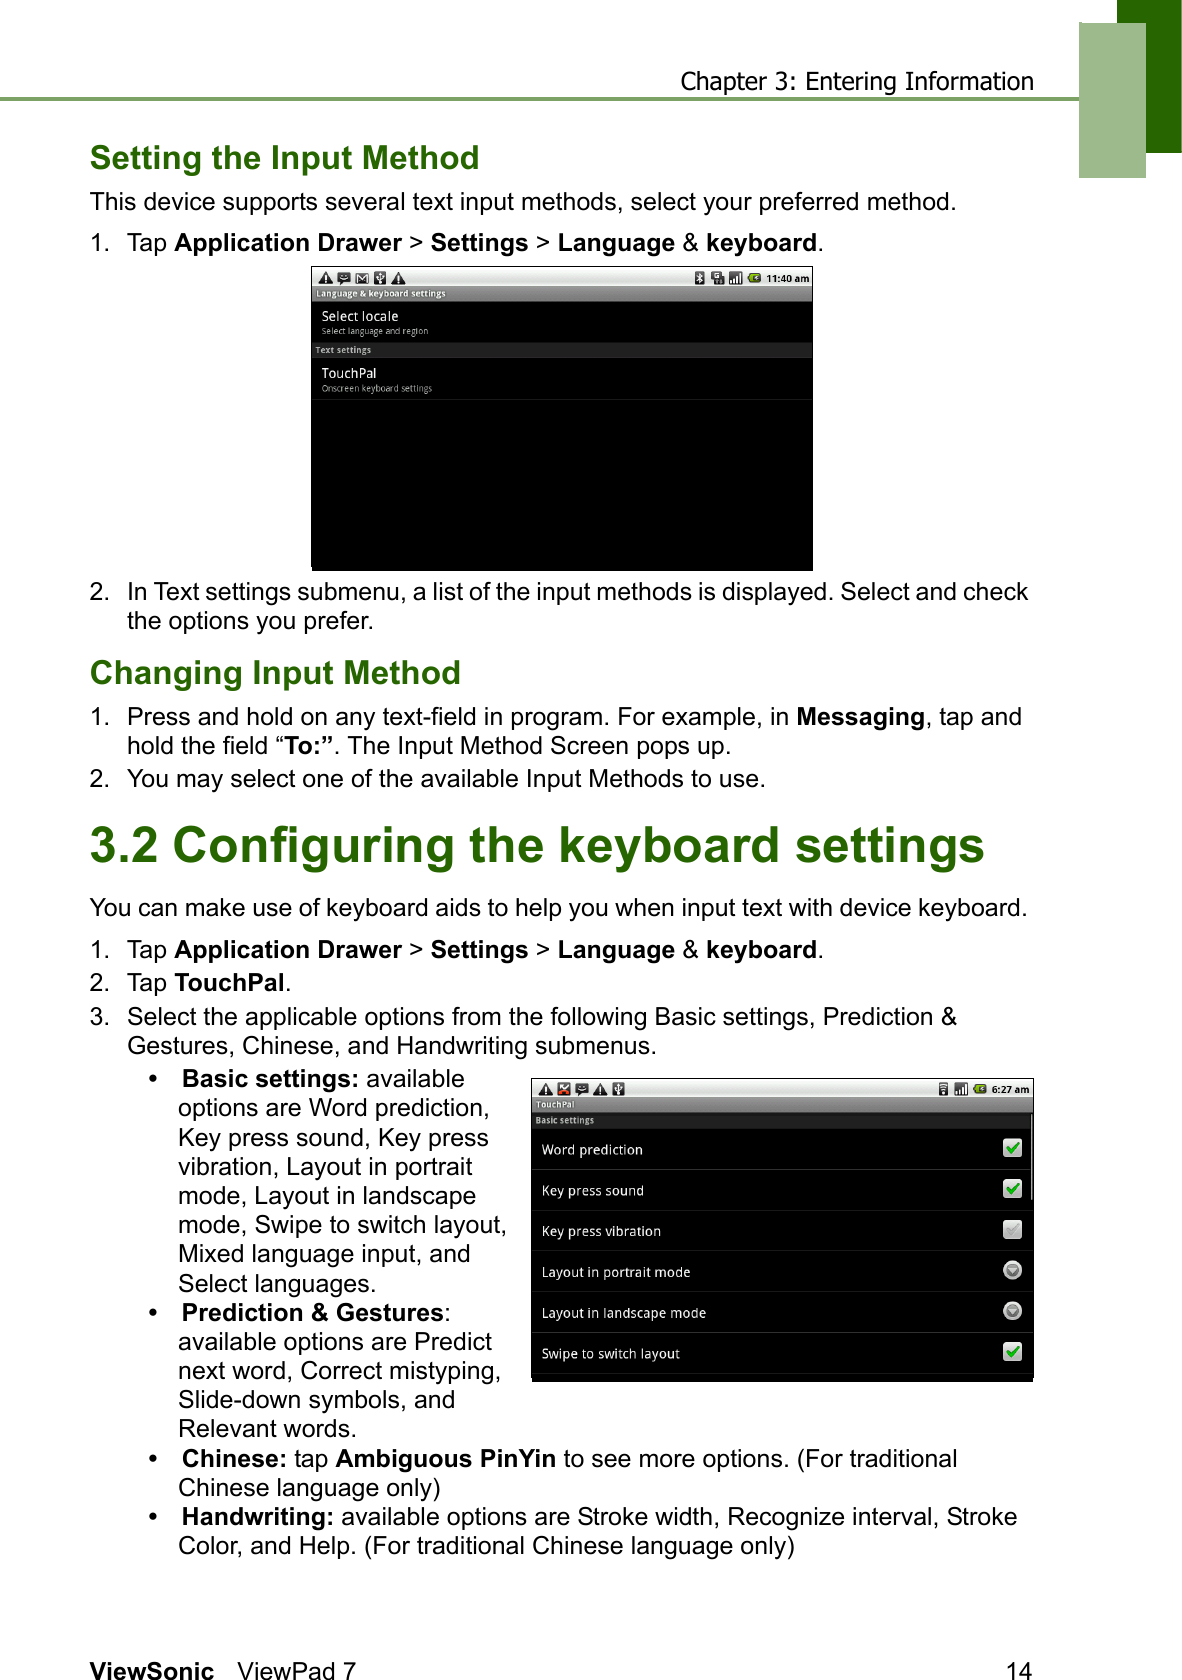 Chapter 3: Entering InformationViewSonic ViewPad 7 14Setting the Input MethodThis device supports several text input methods, select your preferred method.1. Tap Application Drawer &gt; Settings &gt; Language &amp; keyboard.2. In Text settings submenu, a list of the input methods is displayed. Select and check the options you prefer. Changing Input Method1. Press and hold on any text-field in program. For example, in Messaging, tap and hold the field “To:”. The Input Method Screen pops up.2. You may select one of the available Input Methods to use.3.2 Configuring the keyboard settingsYou can make use of keyboard aids to help you when input text with device keyboard. 1. Tap Application Drawer &gt; Settings &gt; Language &amp; keyboard.2. Tap TouchPal. 3. Select the applicable options from the following Basic settings, Prediction &amp; Gestures, Chinese, and Handwriting submenus.• Basic settings: available options are Word prediction, Key press sound, Key press vibration, Layout in portrait mode, Layout in landscape mode, Swipe to switch layout, Mixed language input, and Select languages.• Prediction &amp; Gestures: available options are Predict next word, Correct mistyping, Slide-down symbols, and Relevant words.• Chinese: tap Ambiguous PinYin to see more options. (For traditional Chinese language only)• Handwriting: available options are Stroke width, Recognize interval, Stroke Color, and Help. (For traditional Chinese language only)